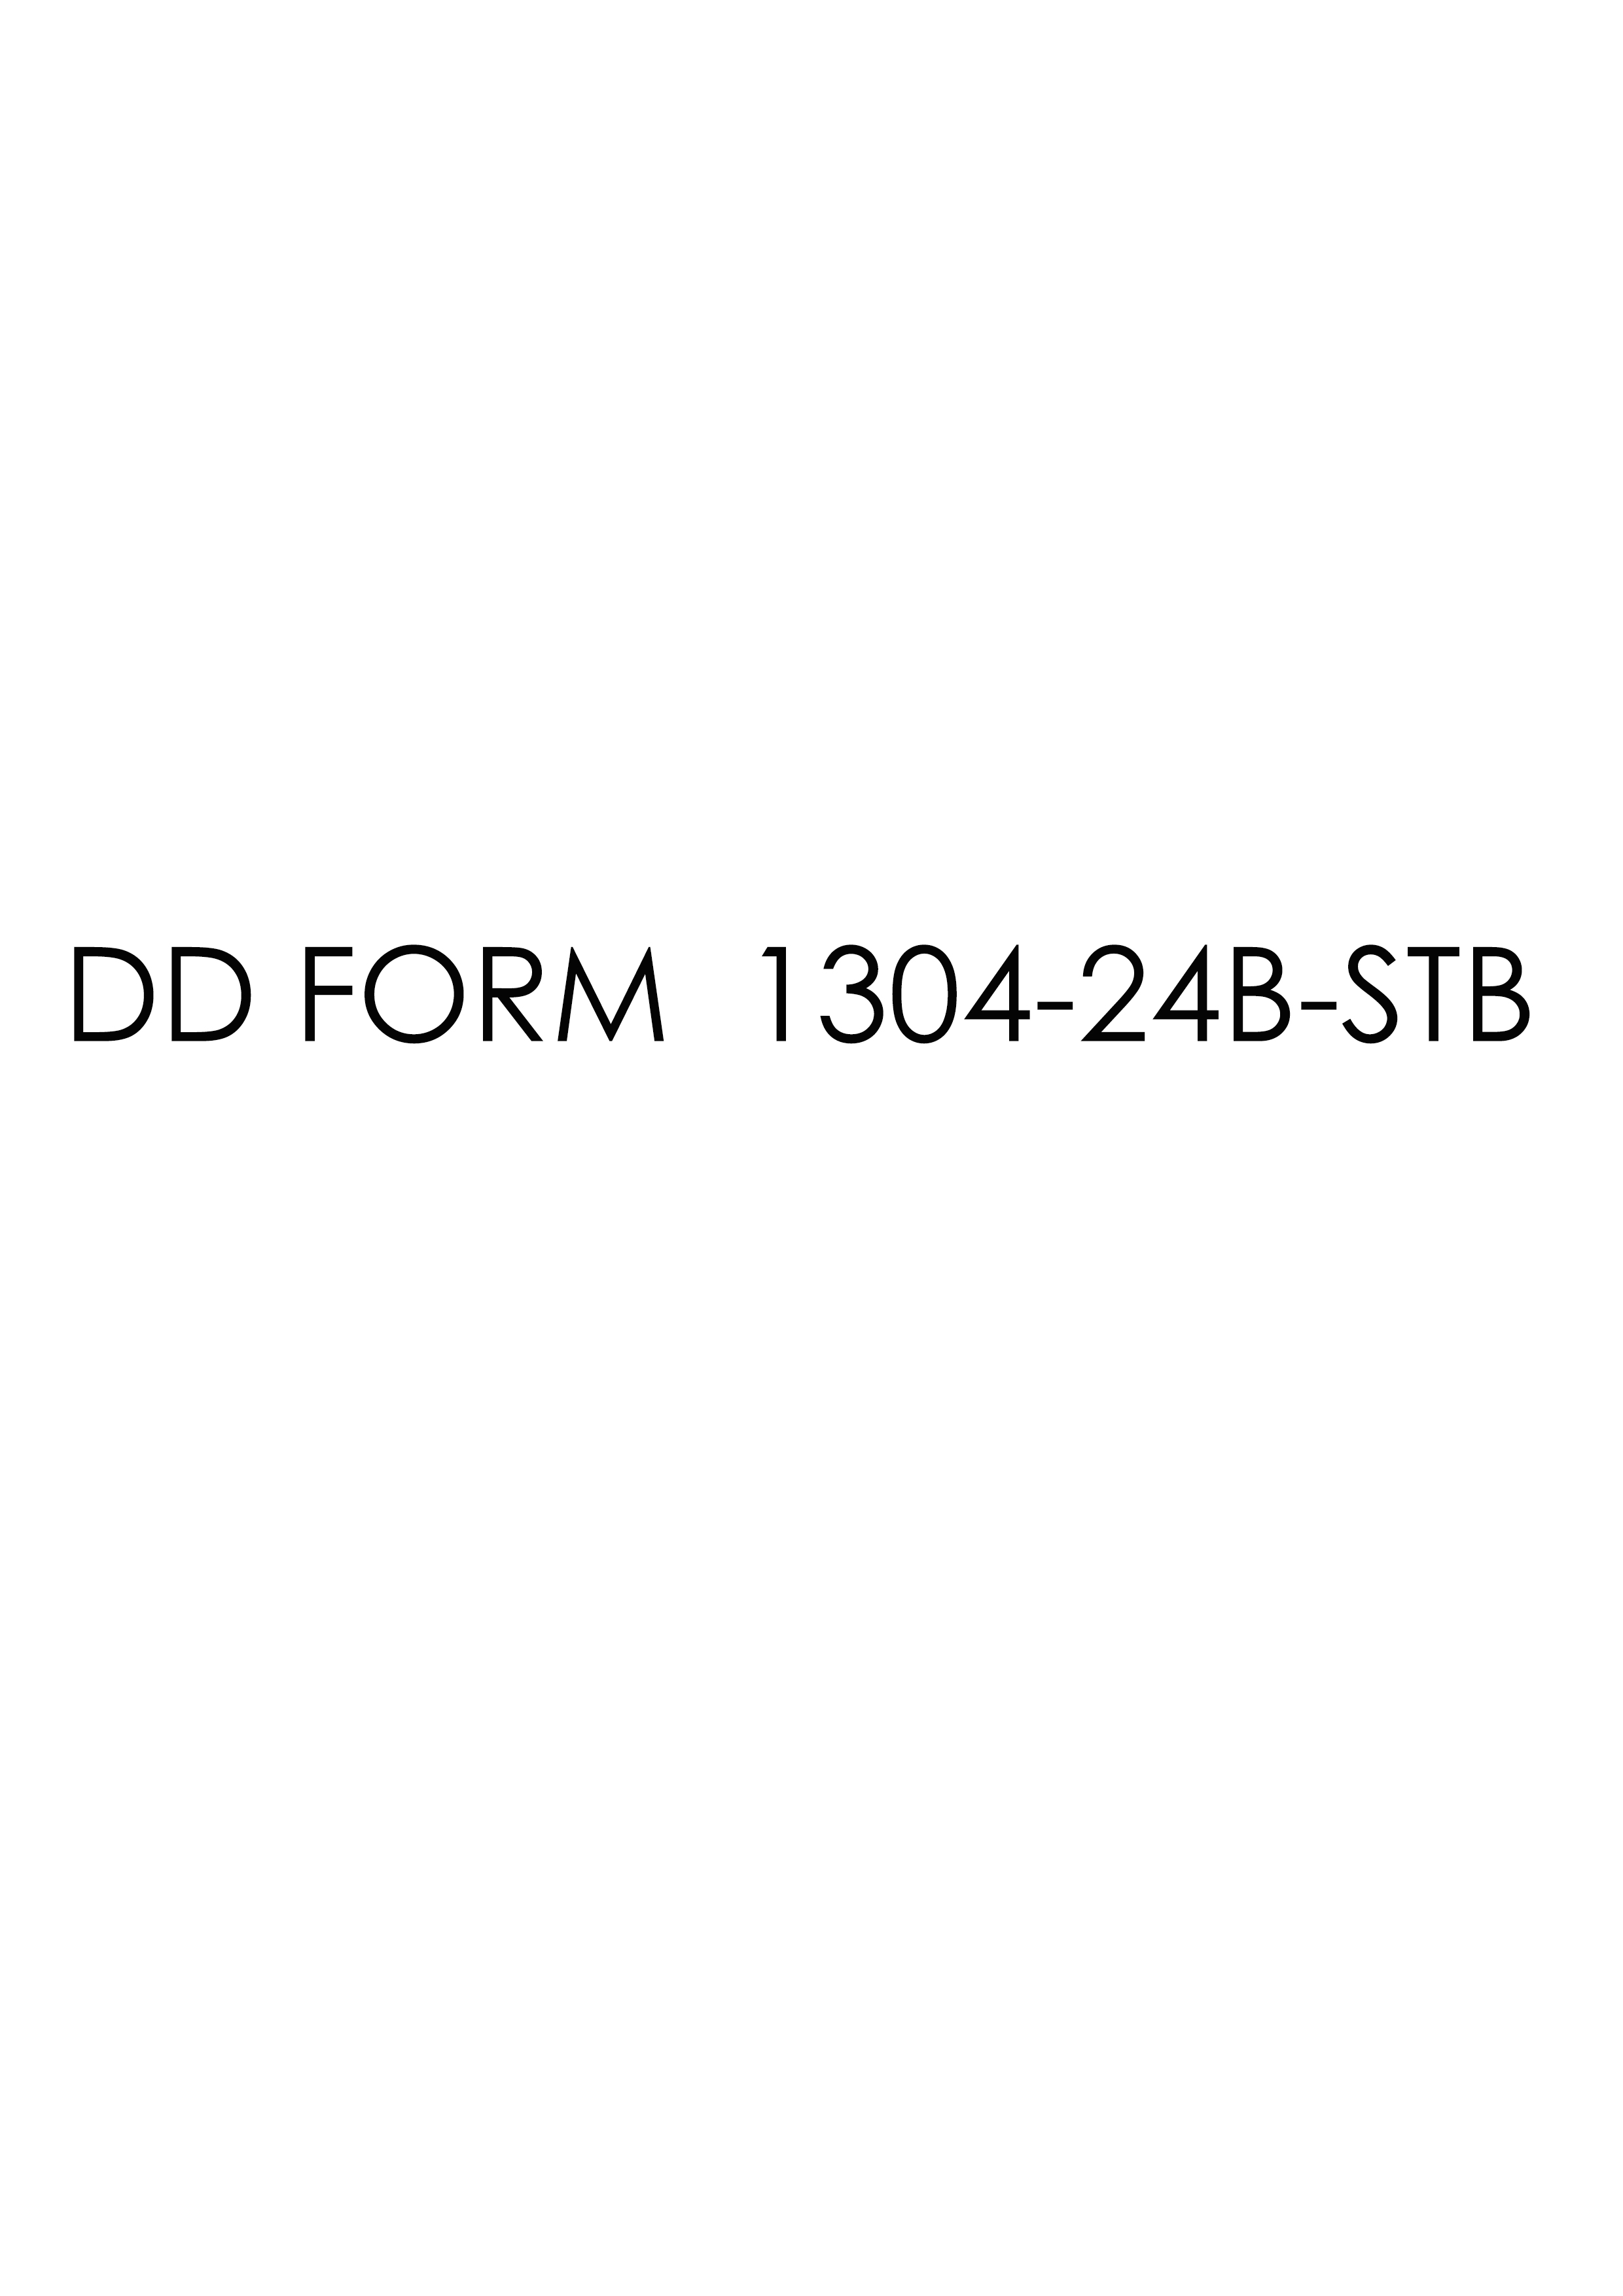 Download Fillable dd Form 1304-24B-STB